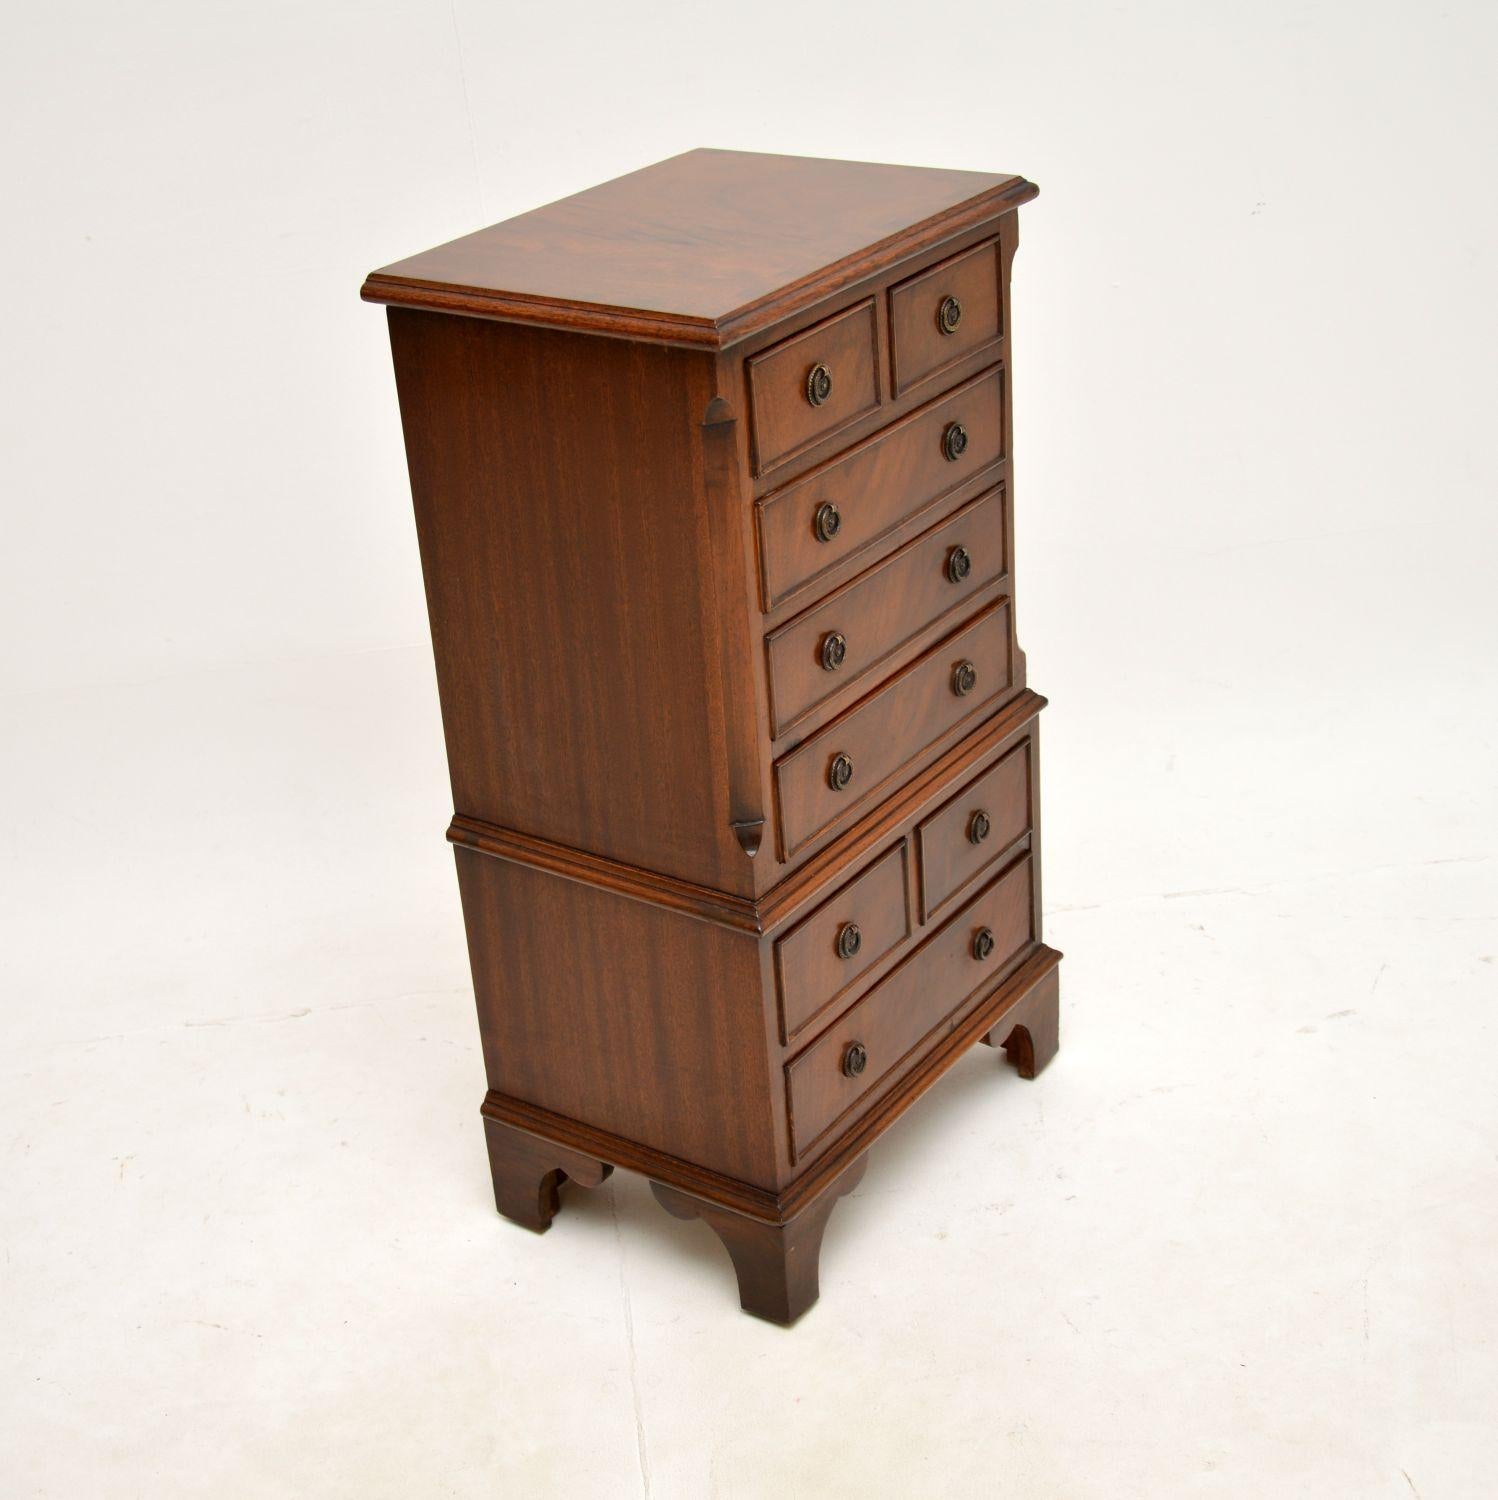 British Antique Georgian Style Chest of Drawers